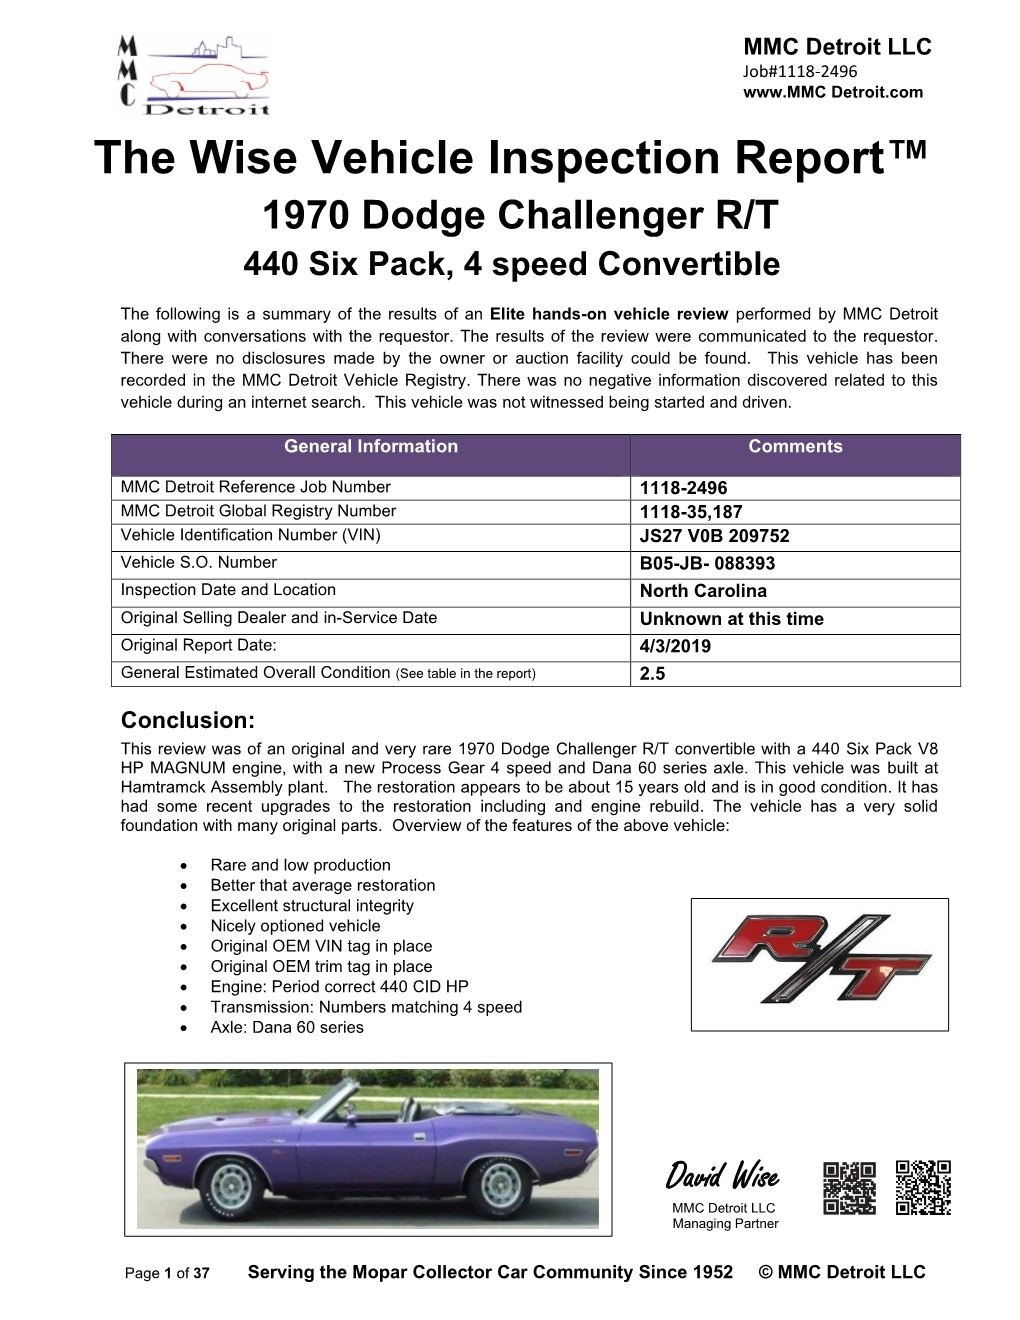 The Wise Vehicle Inspection Report™ 1970 Dodge Challenger R/T 440 Six Pack, 4 Speed Convertible